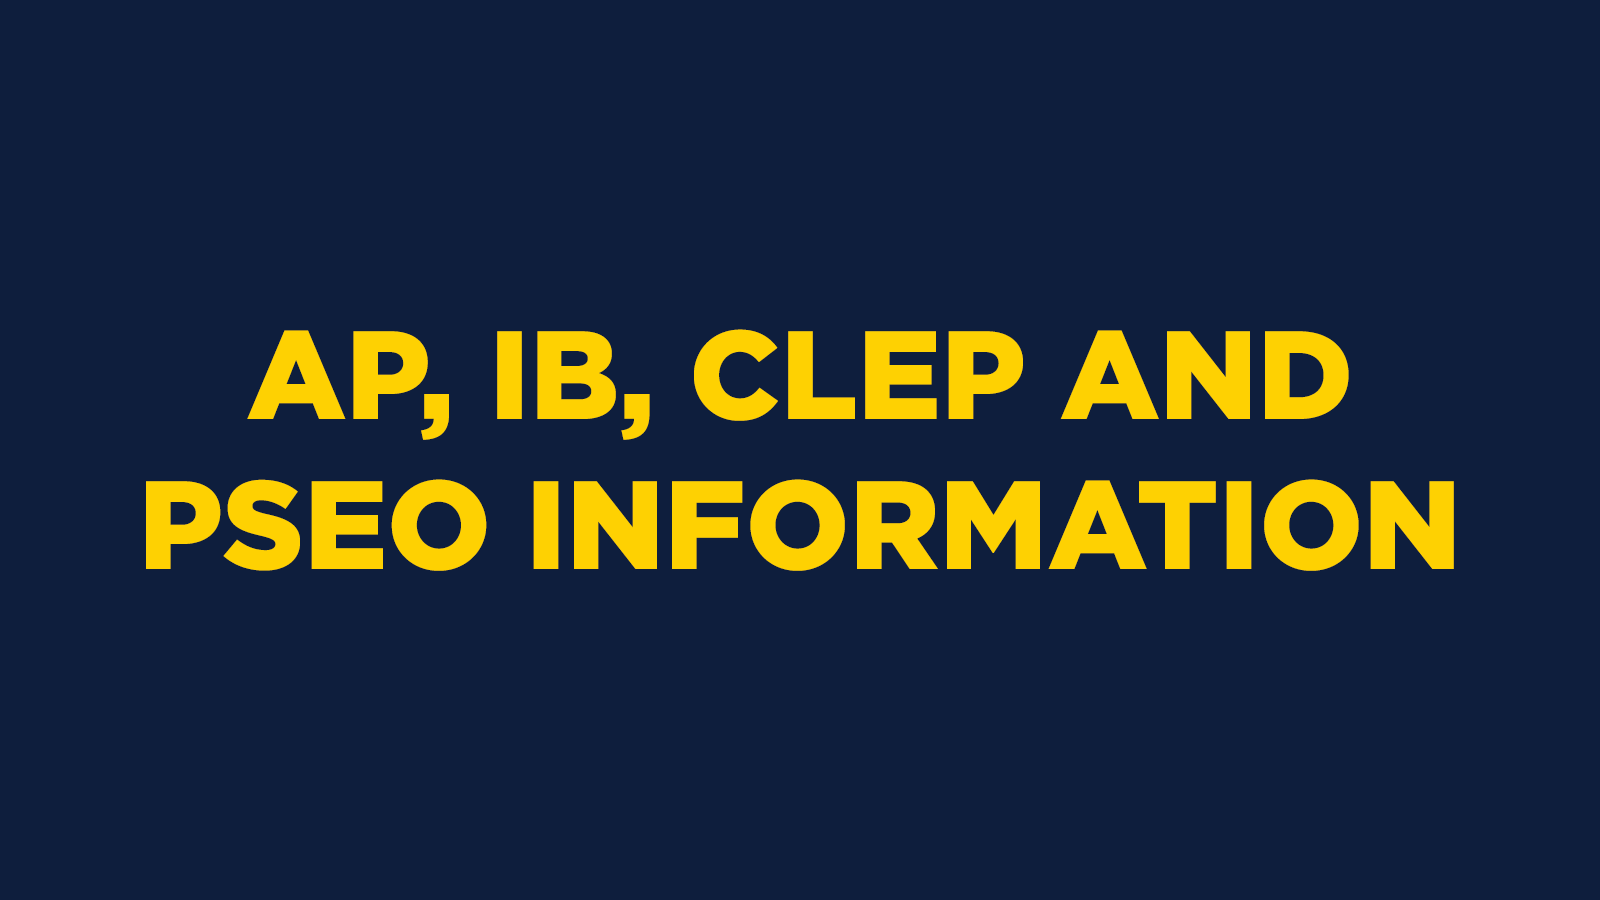 AP, IB, CLEP and PSEO Information